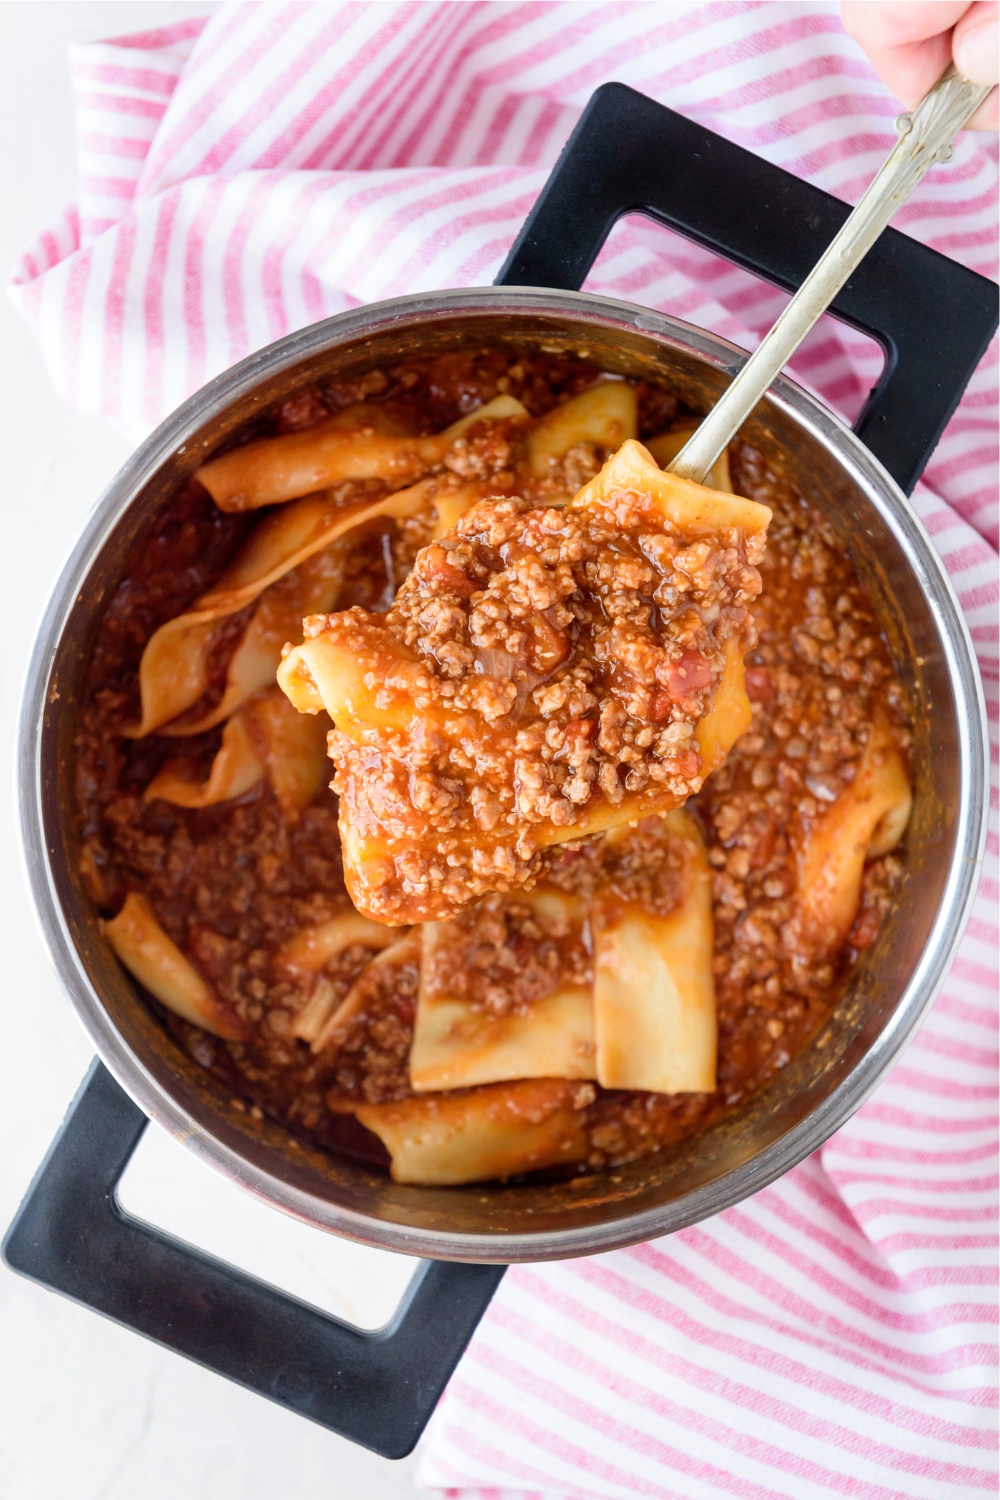 A spoonful of cooked pasta mixed with ground beef in tomato sauce held above a pot filled with more ground beef, pasta, and sauce.